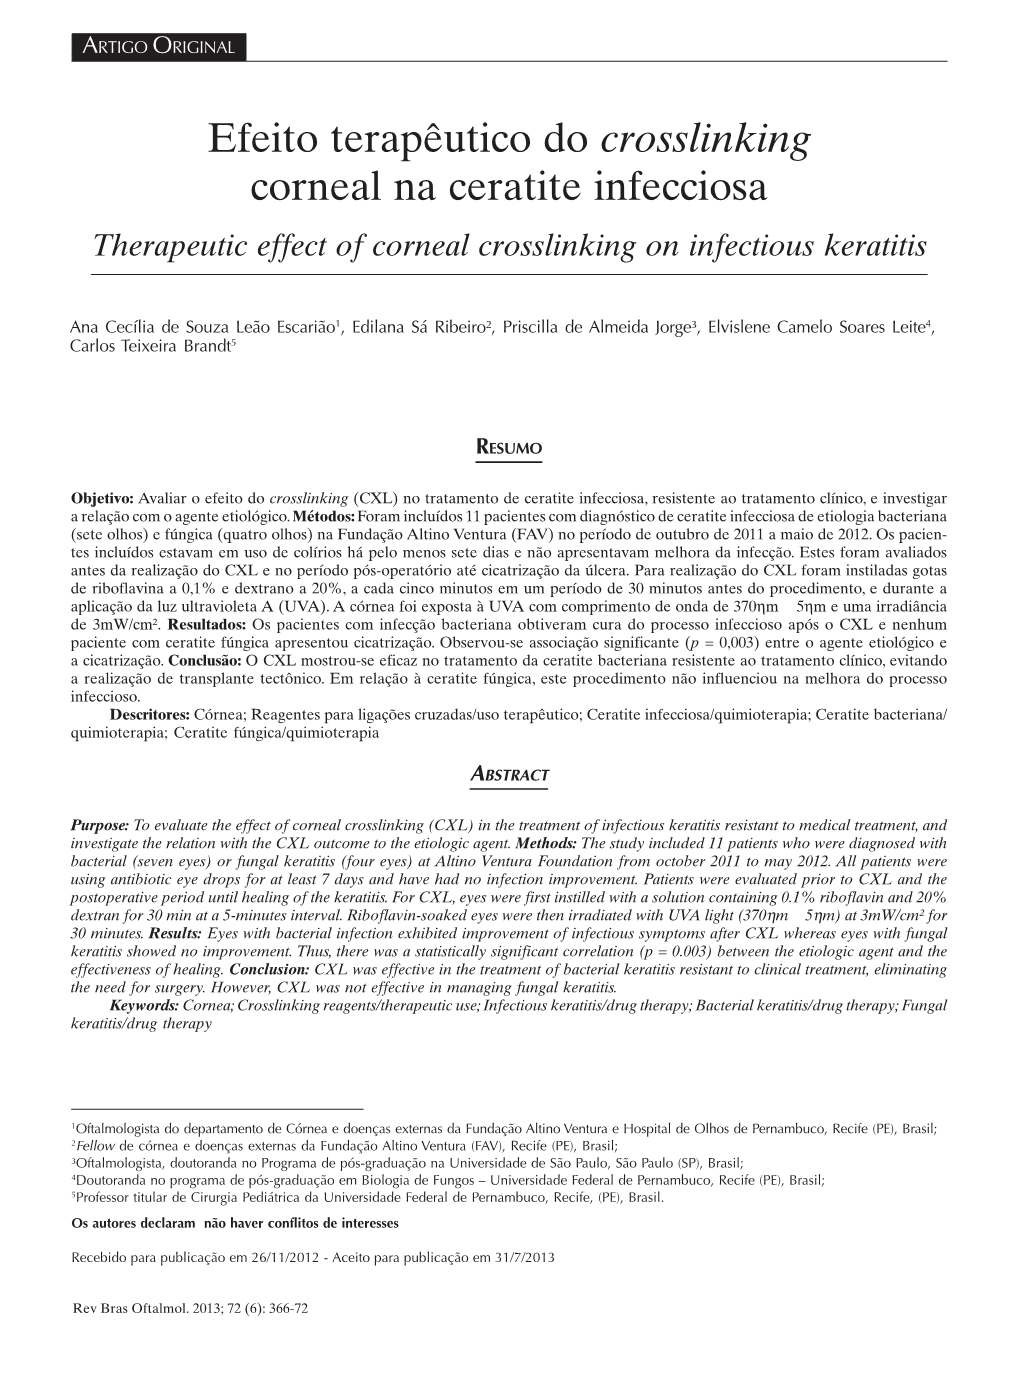 Therapeutic Effect of Corneal Crosslinking on Infectious Keratitis